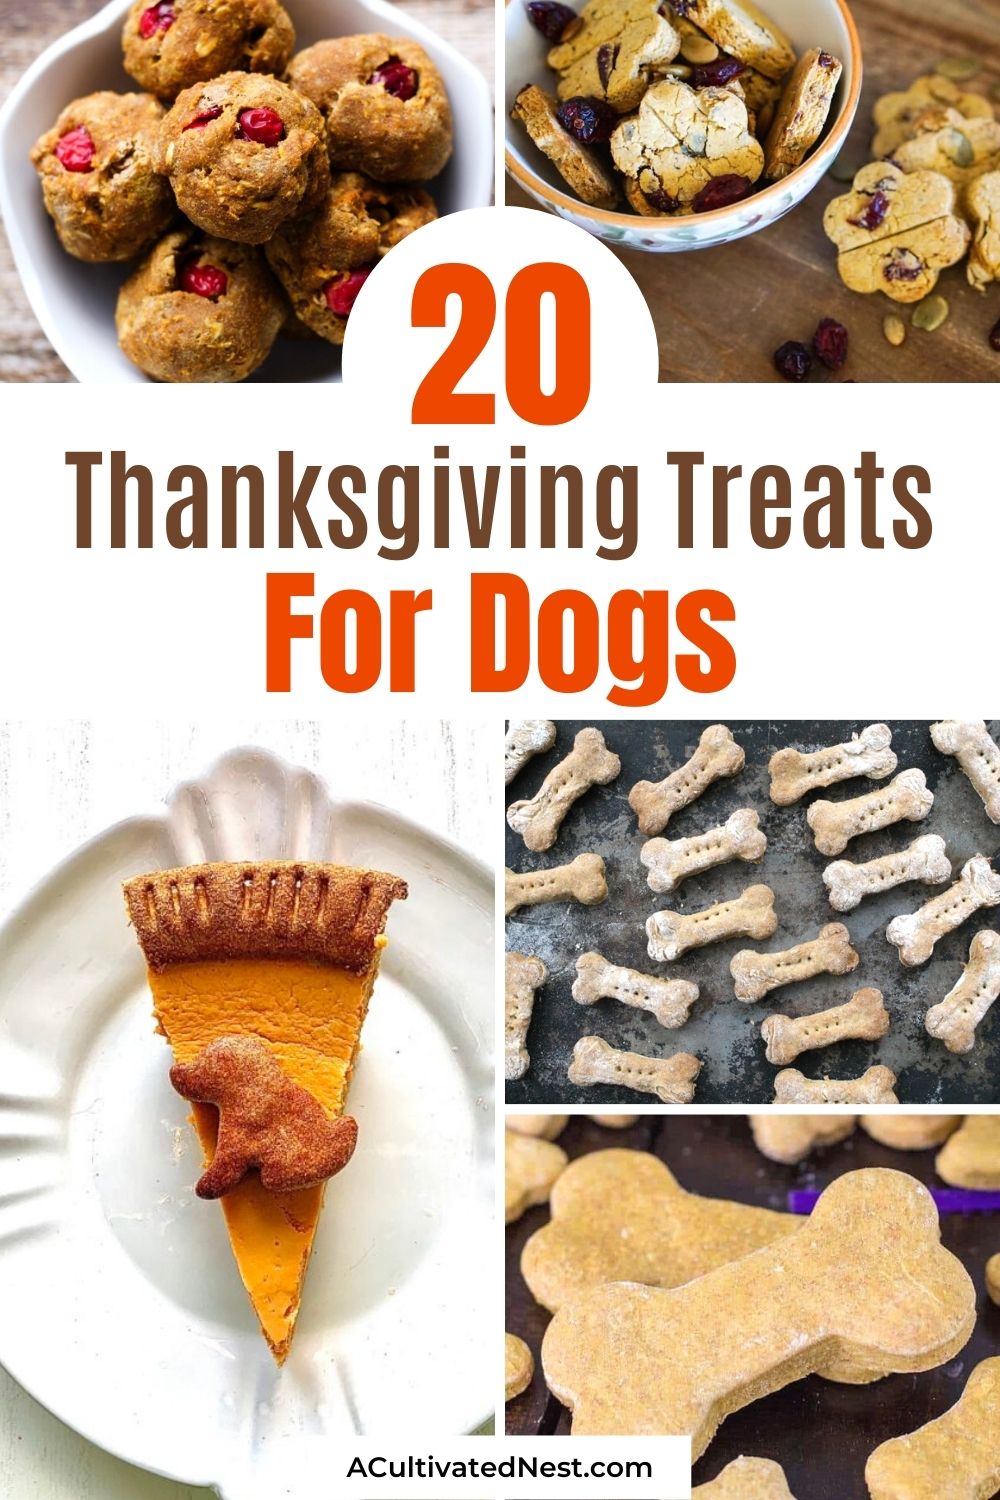 20 Homemade Thanksgiving Dog Treats- This year, let your dog enjoy some delicious treats on Thanksgiving, too, with these homemade Thanksgiving dog treats! There are so many dog-friendly Thanksgiving recipes you can try! | dog treat recipes for Thanksgiving, #homemadeDogTreats #dogTreats #dogTreatRecipe #dogFood #ACultivatedNest